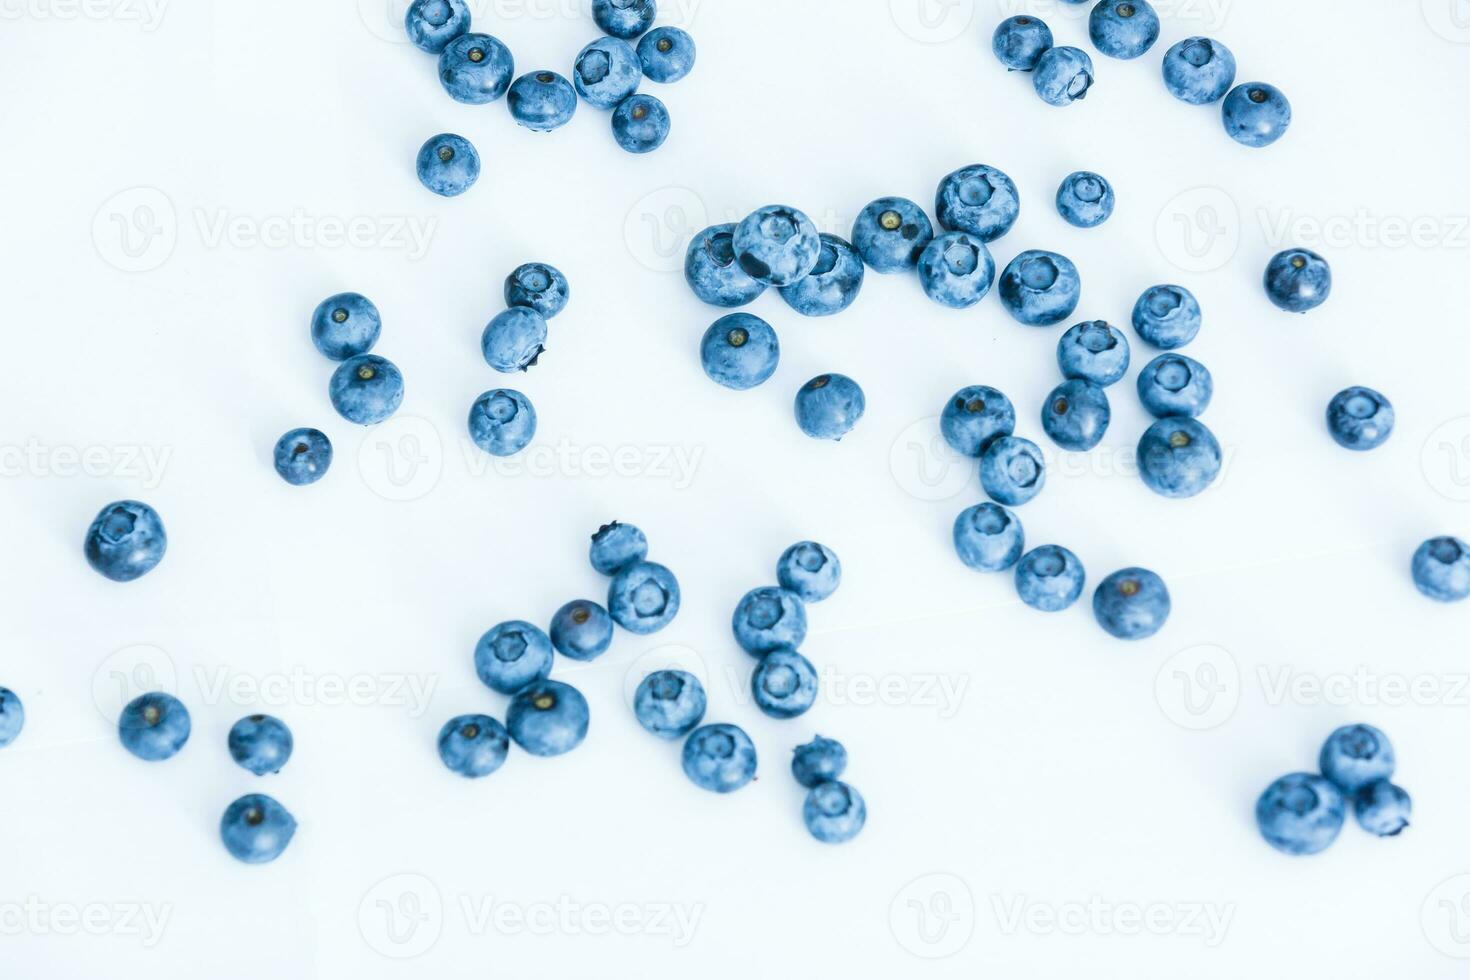 Tasty blueberries isolated on white background. Blueberries are antioxidant organic superfood. photo